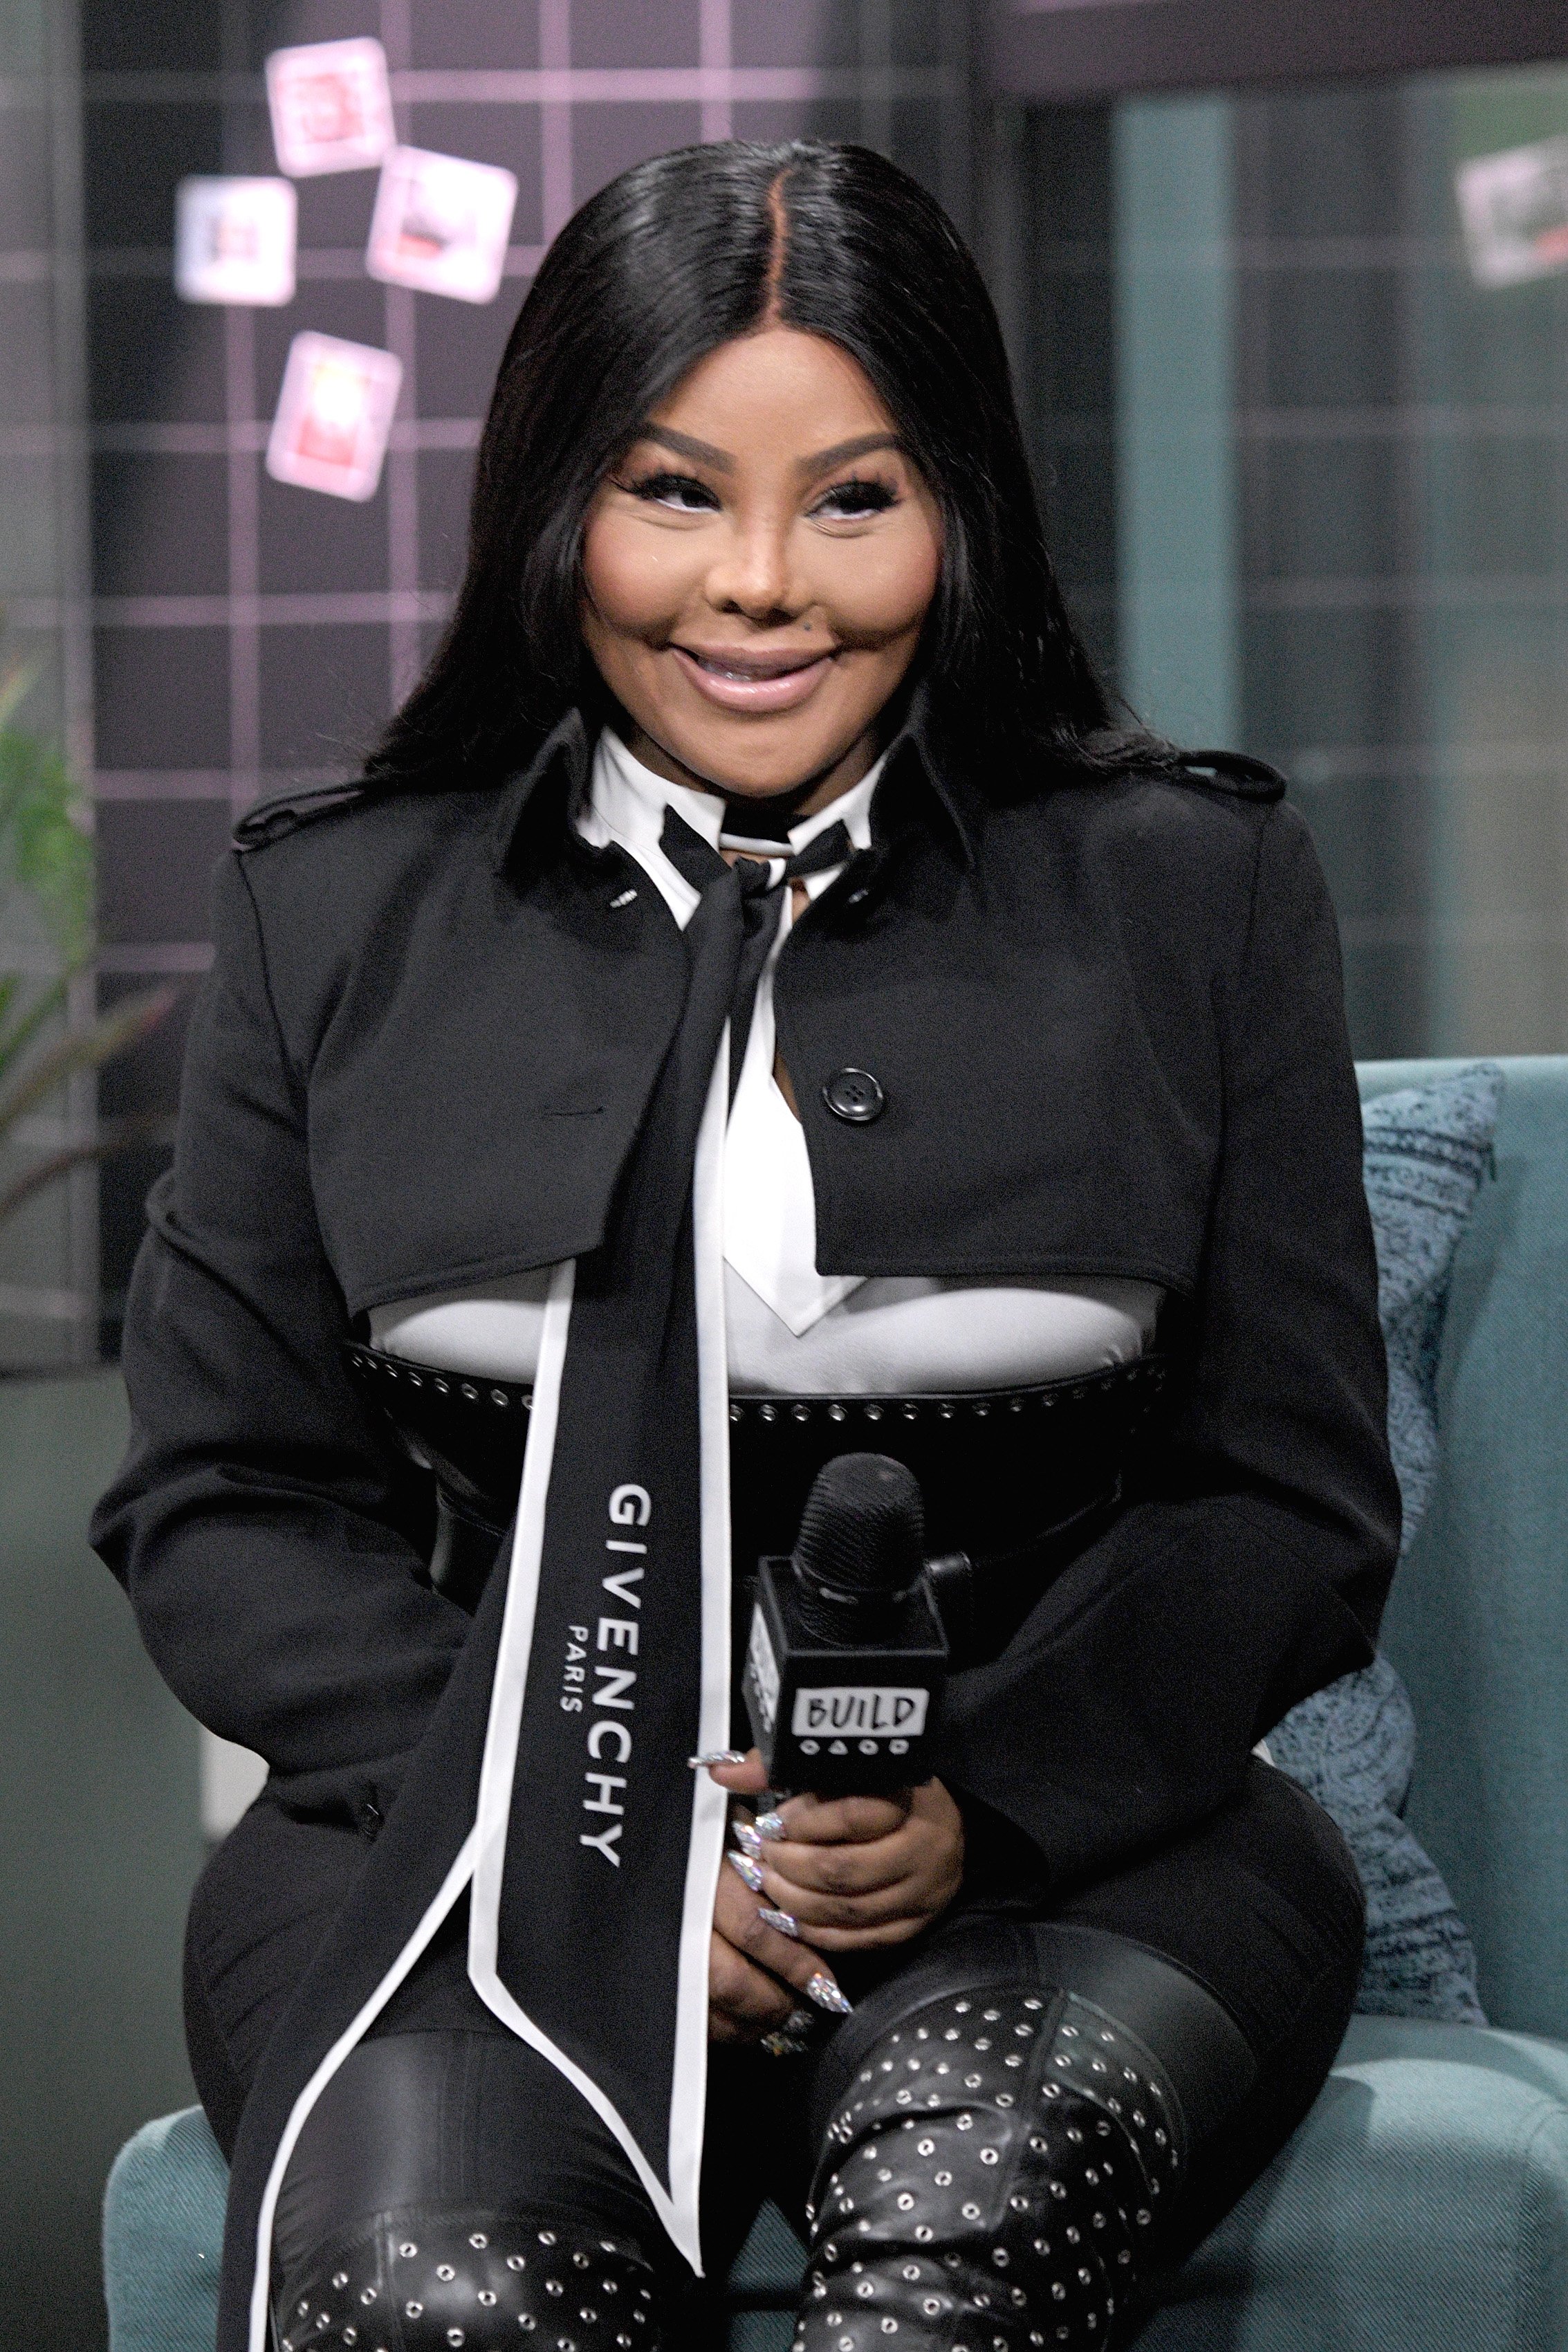 Lil' Kim visits the Build Series to discuss her new album "9" at Build Studio on October 8, 2019, in New York City. | Source: Getty Images